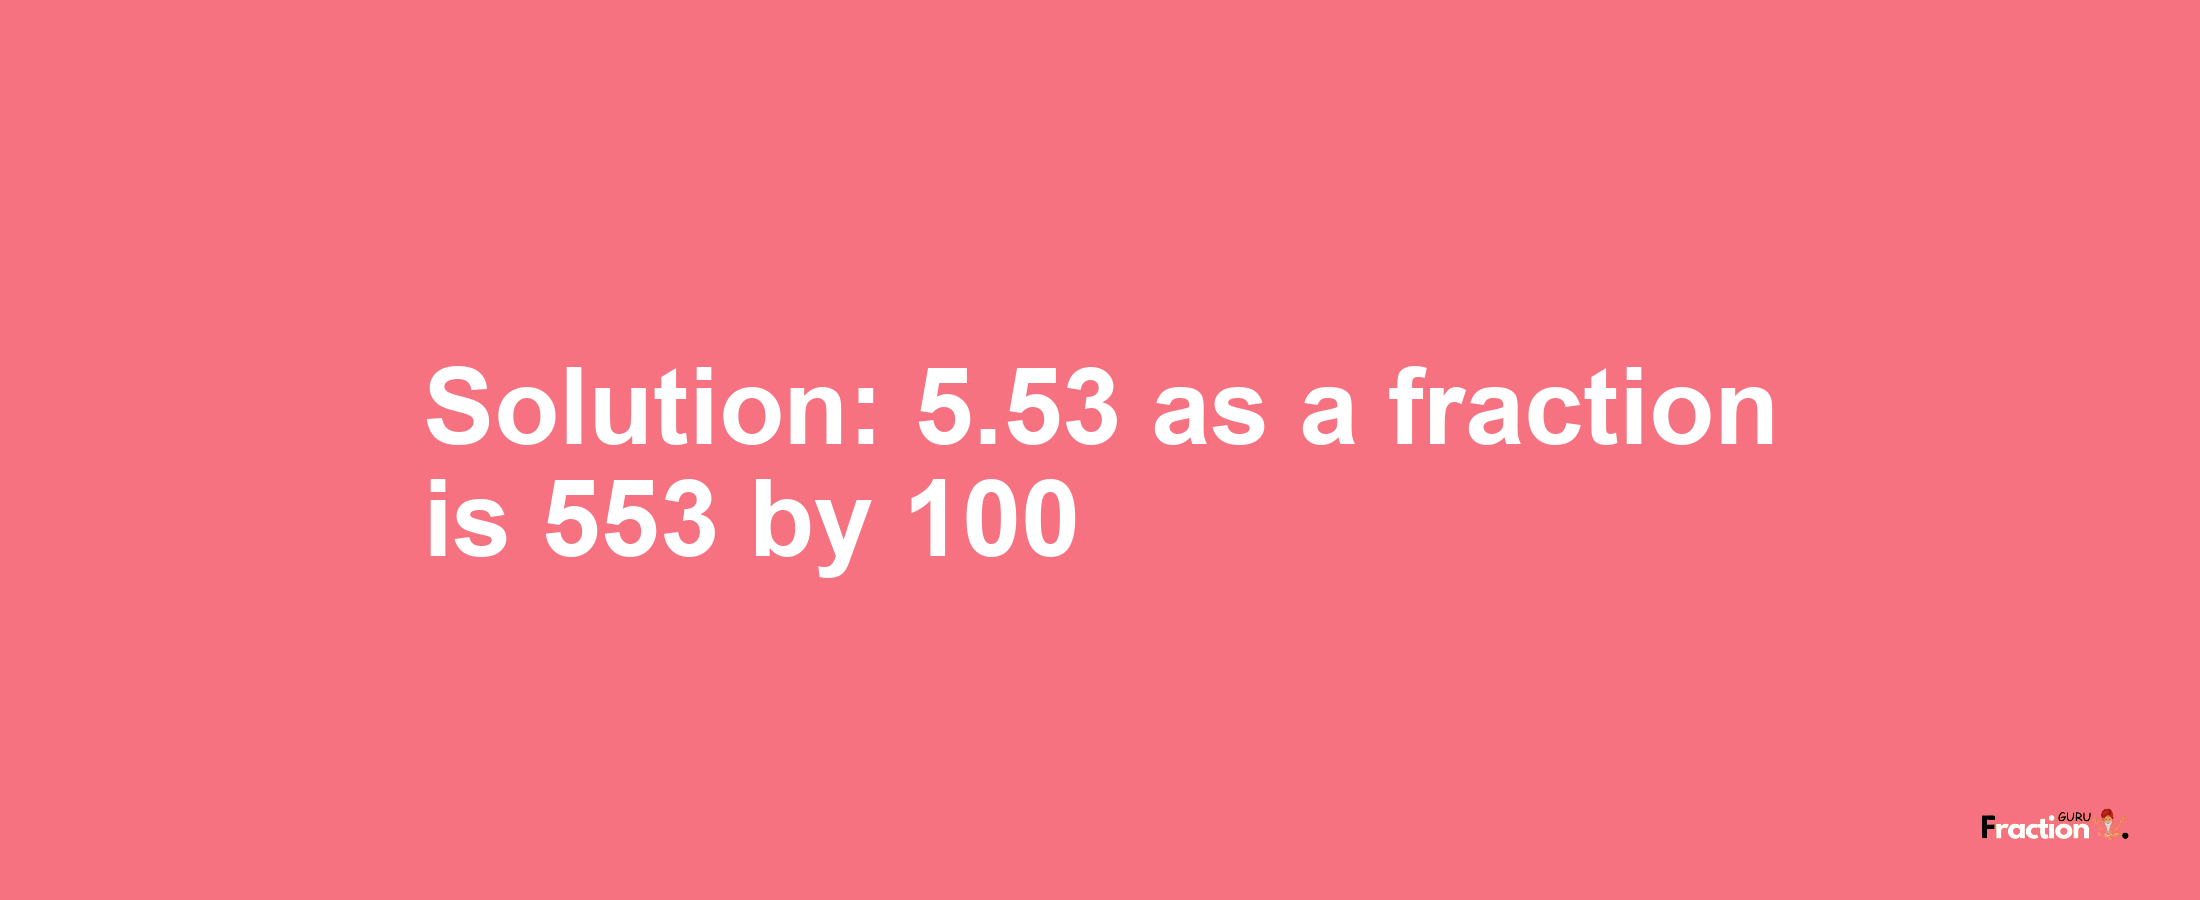 Solution:5.53 as a fraction is 553/100